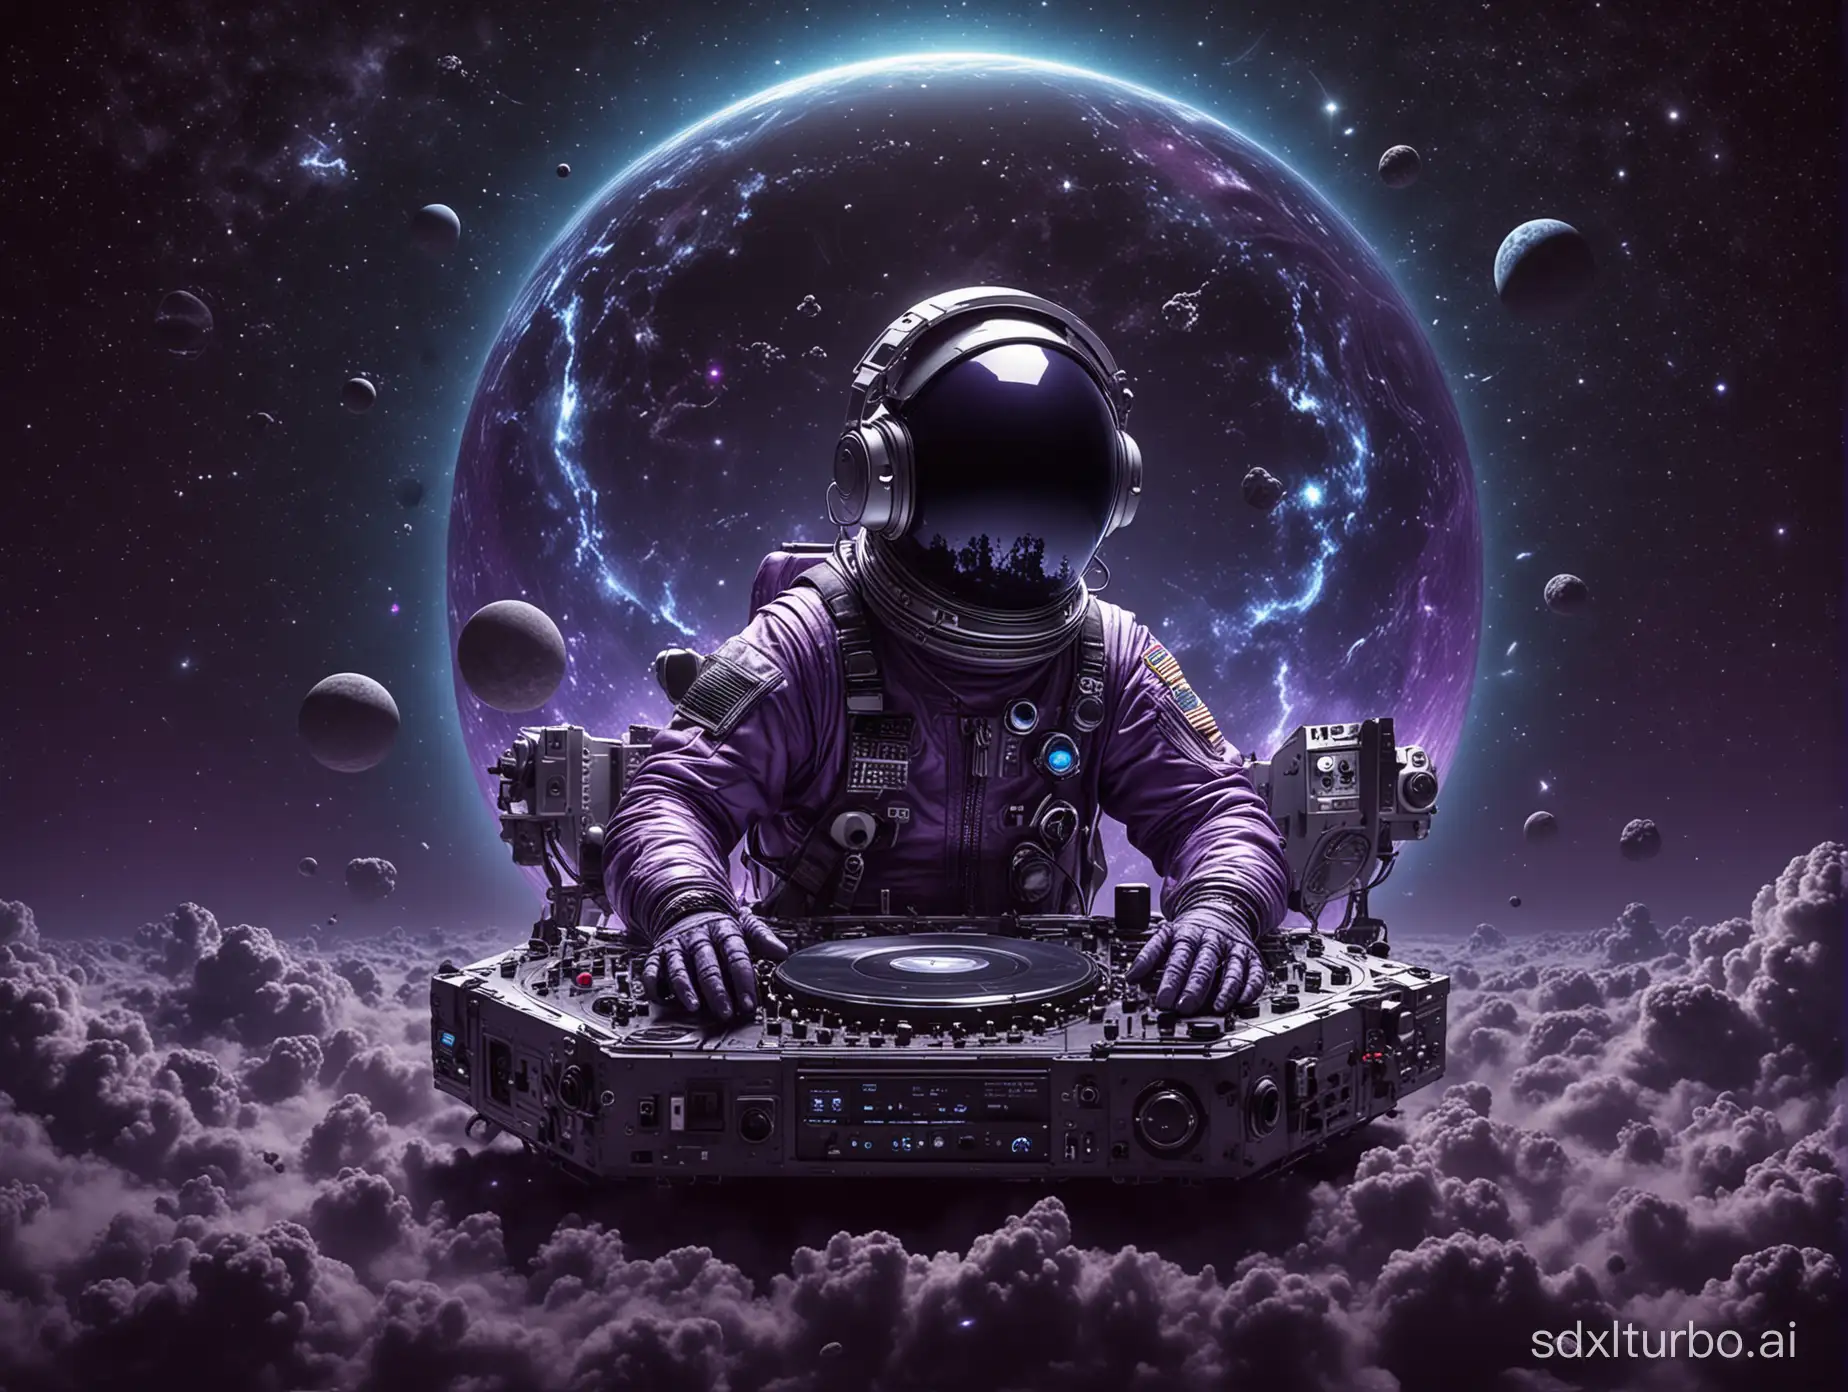 A digital collage featuring the vastness of space intertwined with modern Gothic, and alternative rock elements. An astronaut, barley noticable, floats among celestial bodies, wearing DJ headphones. Nearby, a modern turntable or DJ mixer emits vibrant sound waves. The scene is cast in shades of dark purple to dark blue, with occasional accents in contrasting colors to reflect the energy of 80s and 90s alternative music. Created Using: digital collage techniques, space and music theme, dark, energetic atmosphere, intricate details, celestial bodies, sound waves visualization, astronaut, gothic and alternative iconic rock symbols, dark purple to dark blue color scheme, 80s and 90s music energy, glibatree prompt, intricate visual storytelling --ar 16:9